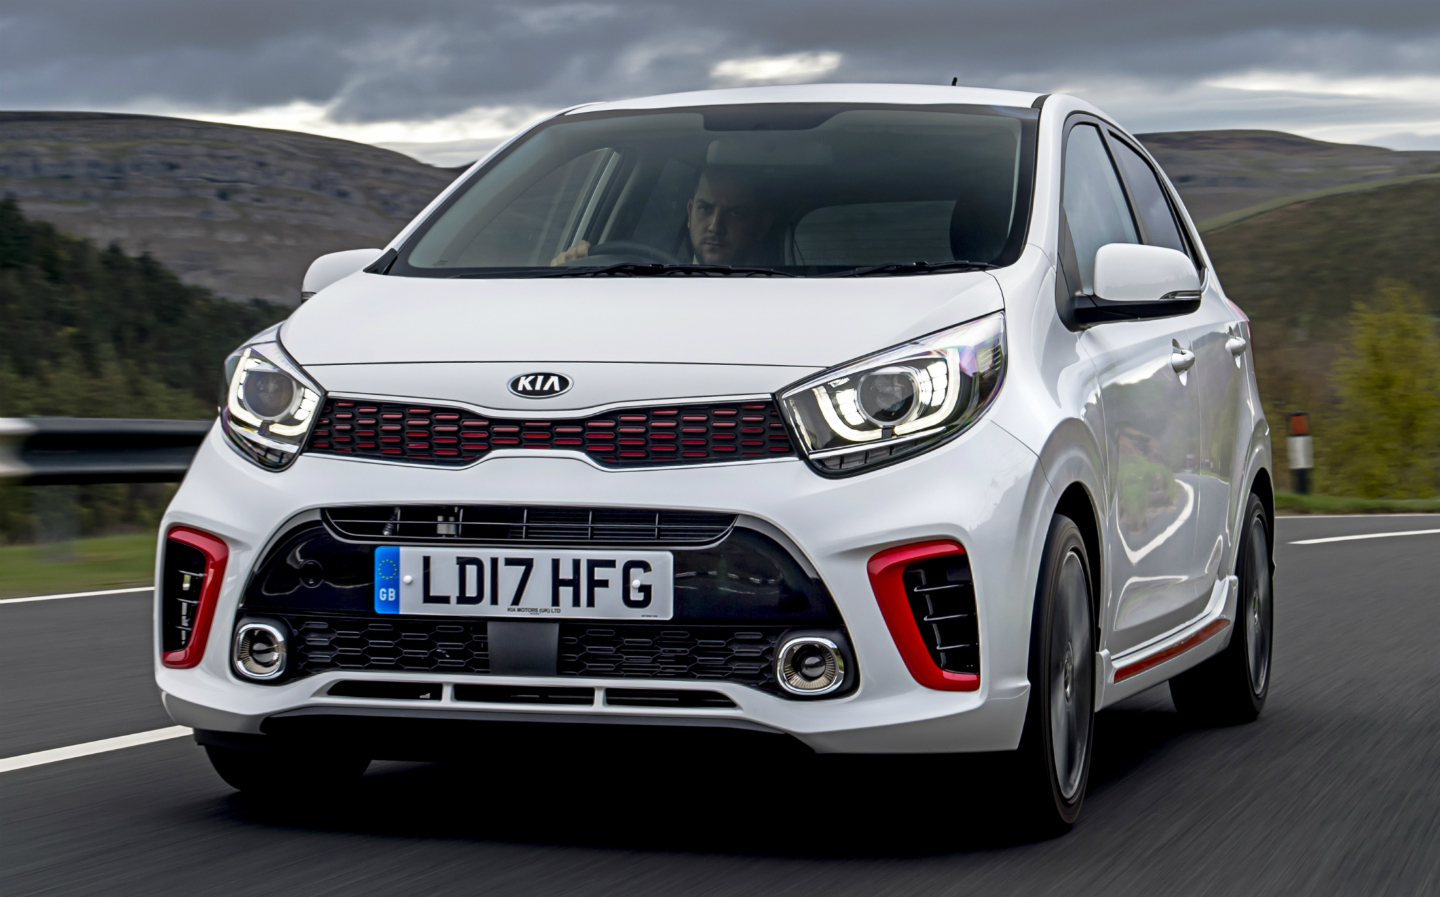 Sunday Times Motor Awards 2019 Best Value Car of the Year. Kia Picanto